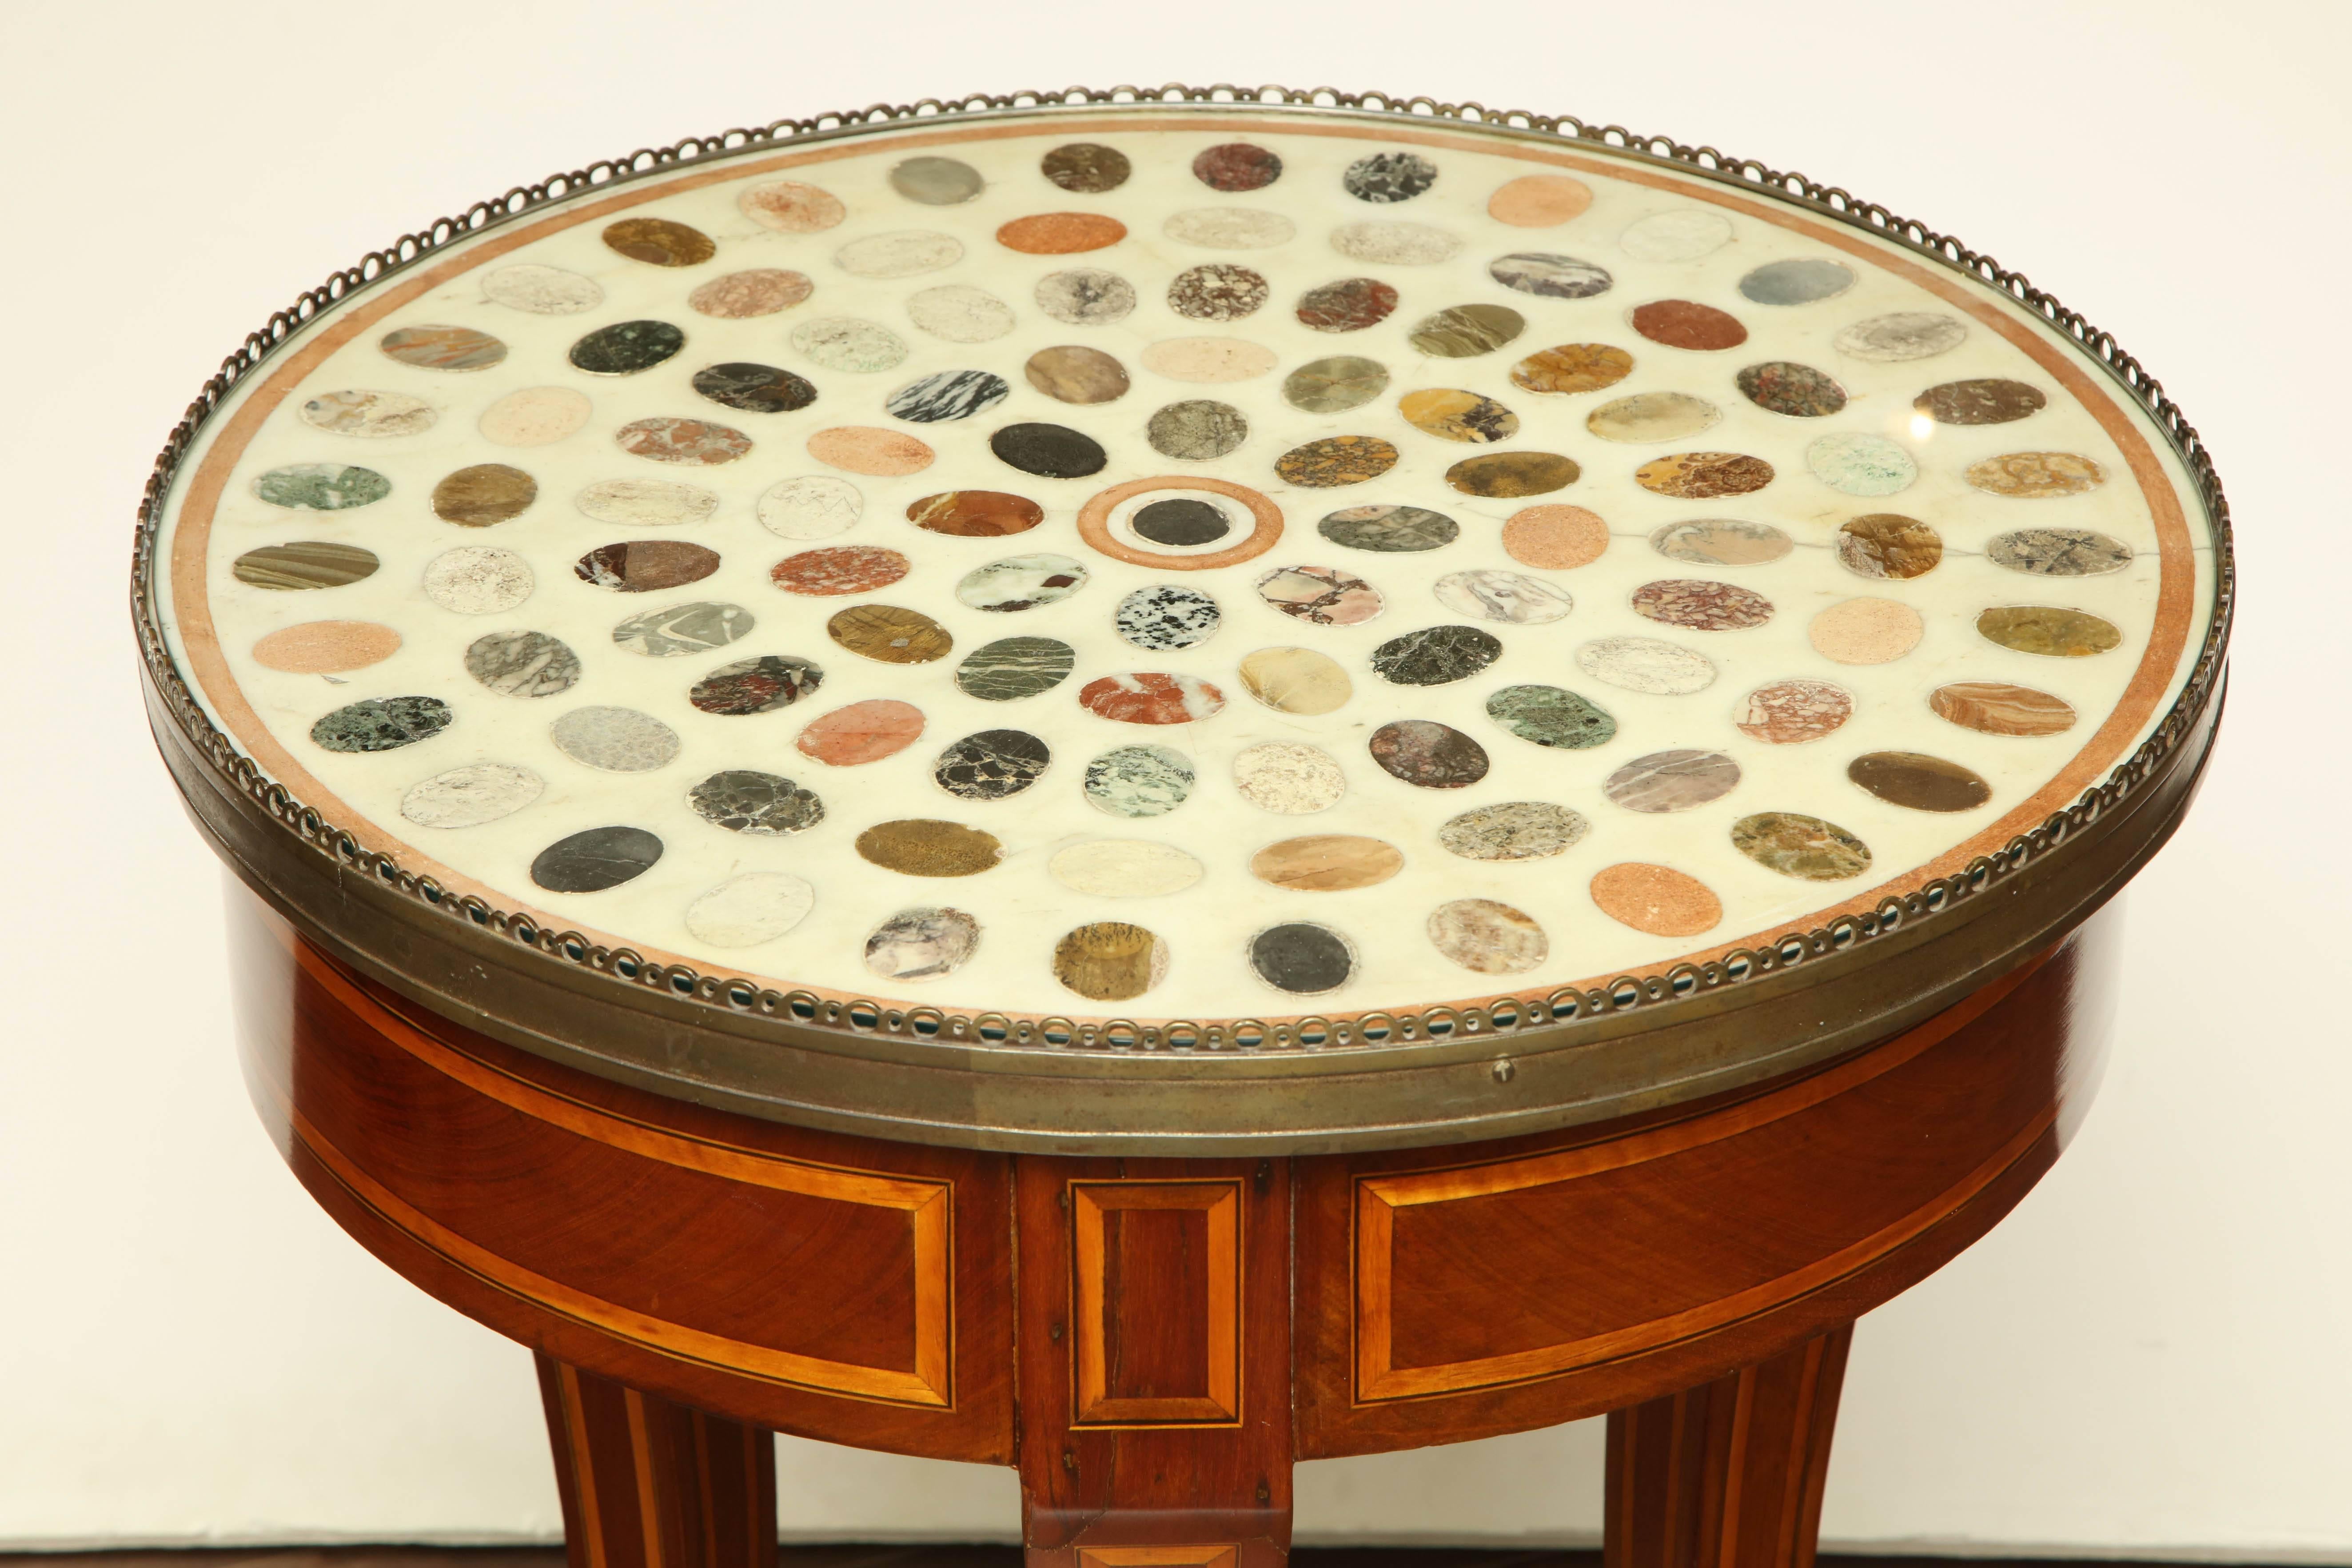 Unusual early 19th century English Regency specimen marble table with brass gallery.